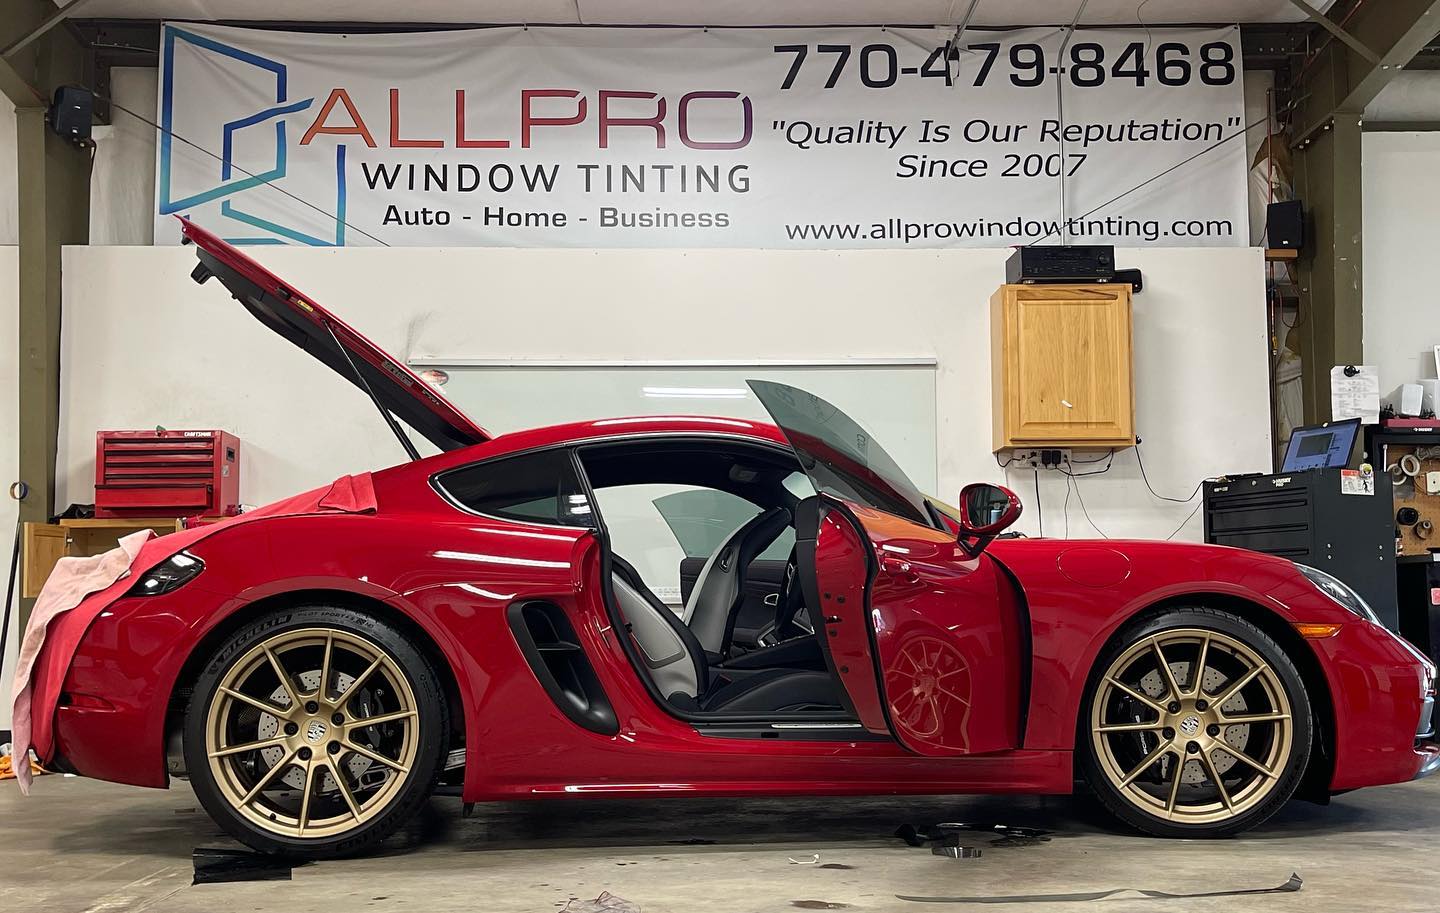 https://www.allprowindowtinting.com/wp-content/uploads/2022/09/red-car.jpeg